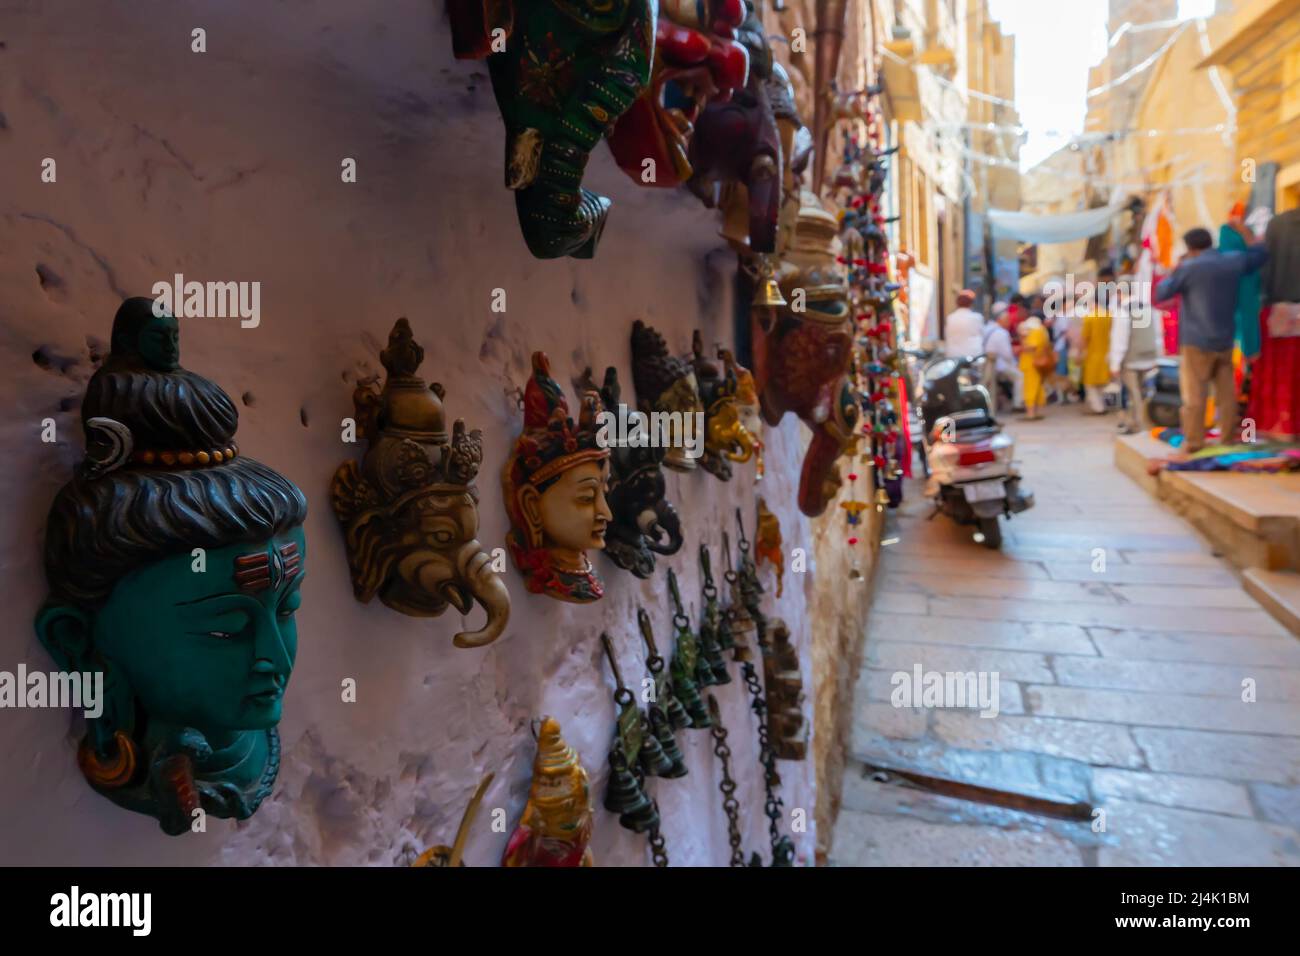 Jaisalmer, Rajasthan, India - October 13, 2019 : Colourful show pieces and handicrafts are displayed for sale to tourists inside Jaisalmer Fort. Stock Photo